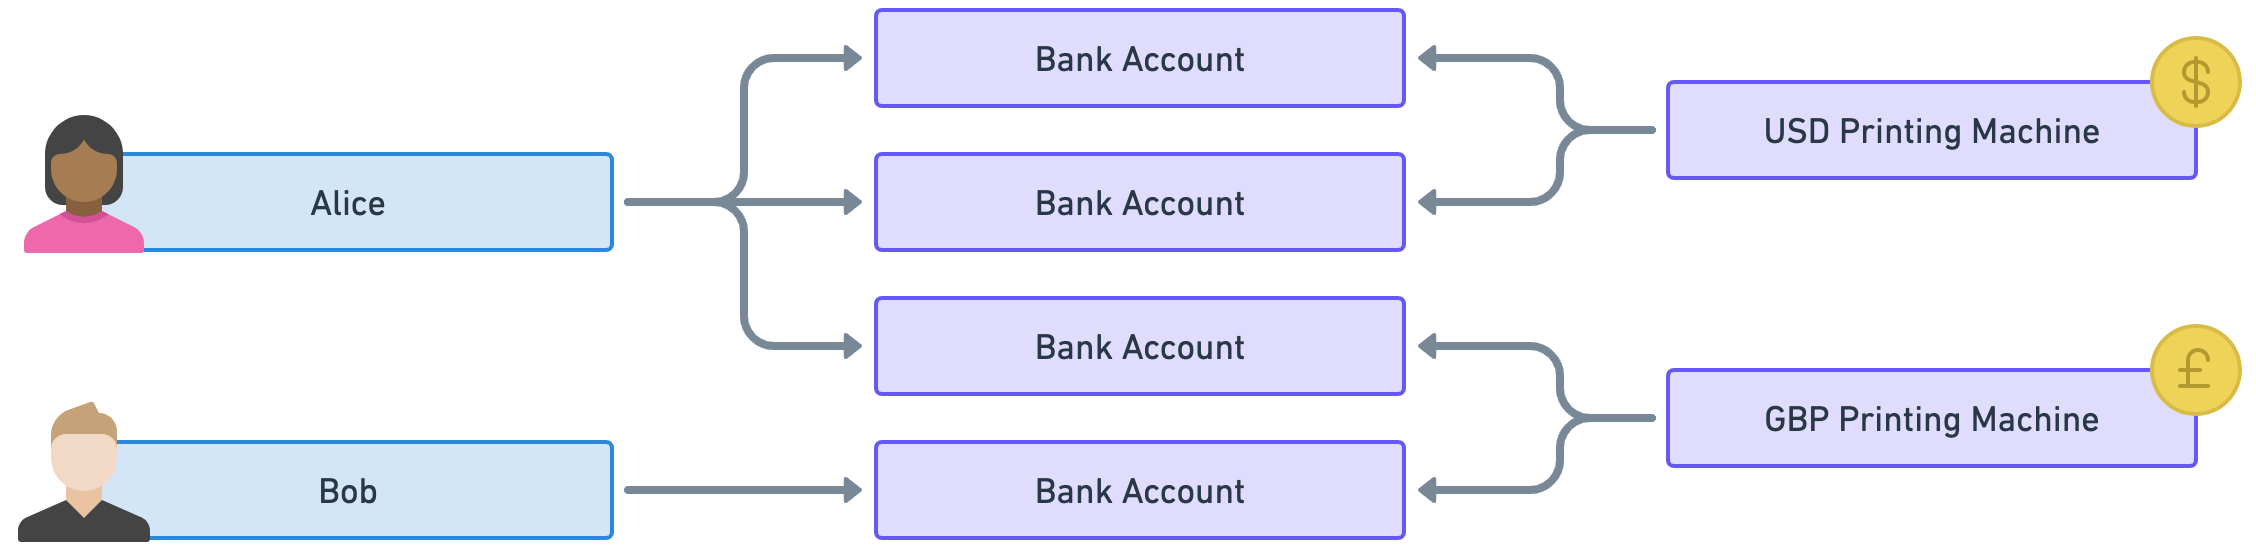 Diagram showing Alice linked to two bank accounts linked to the USD printing machine. Alice is also linked to a third bank account linked to the GBP printing machine. The diagram also shows Bob linked to its own bank account that also links to the GBP printing machine.